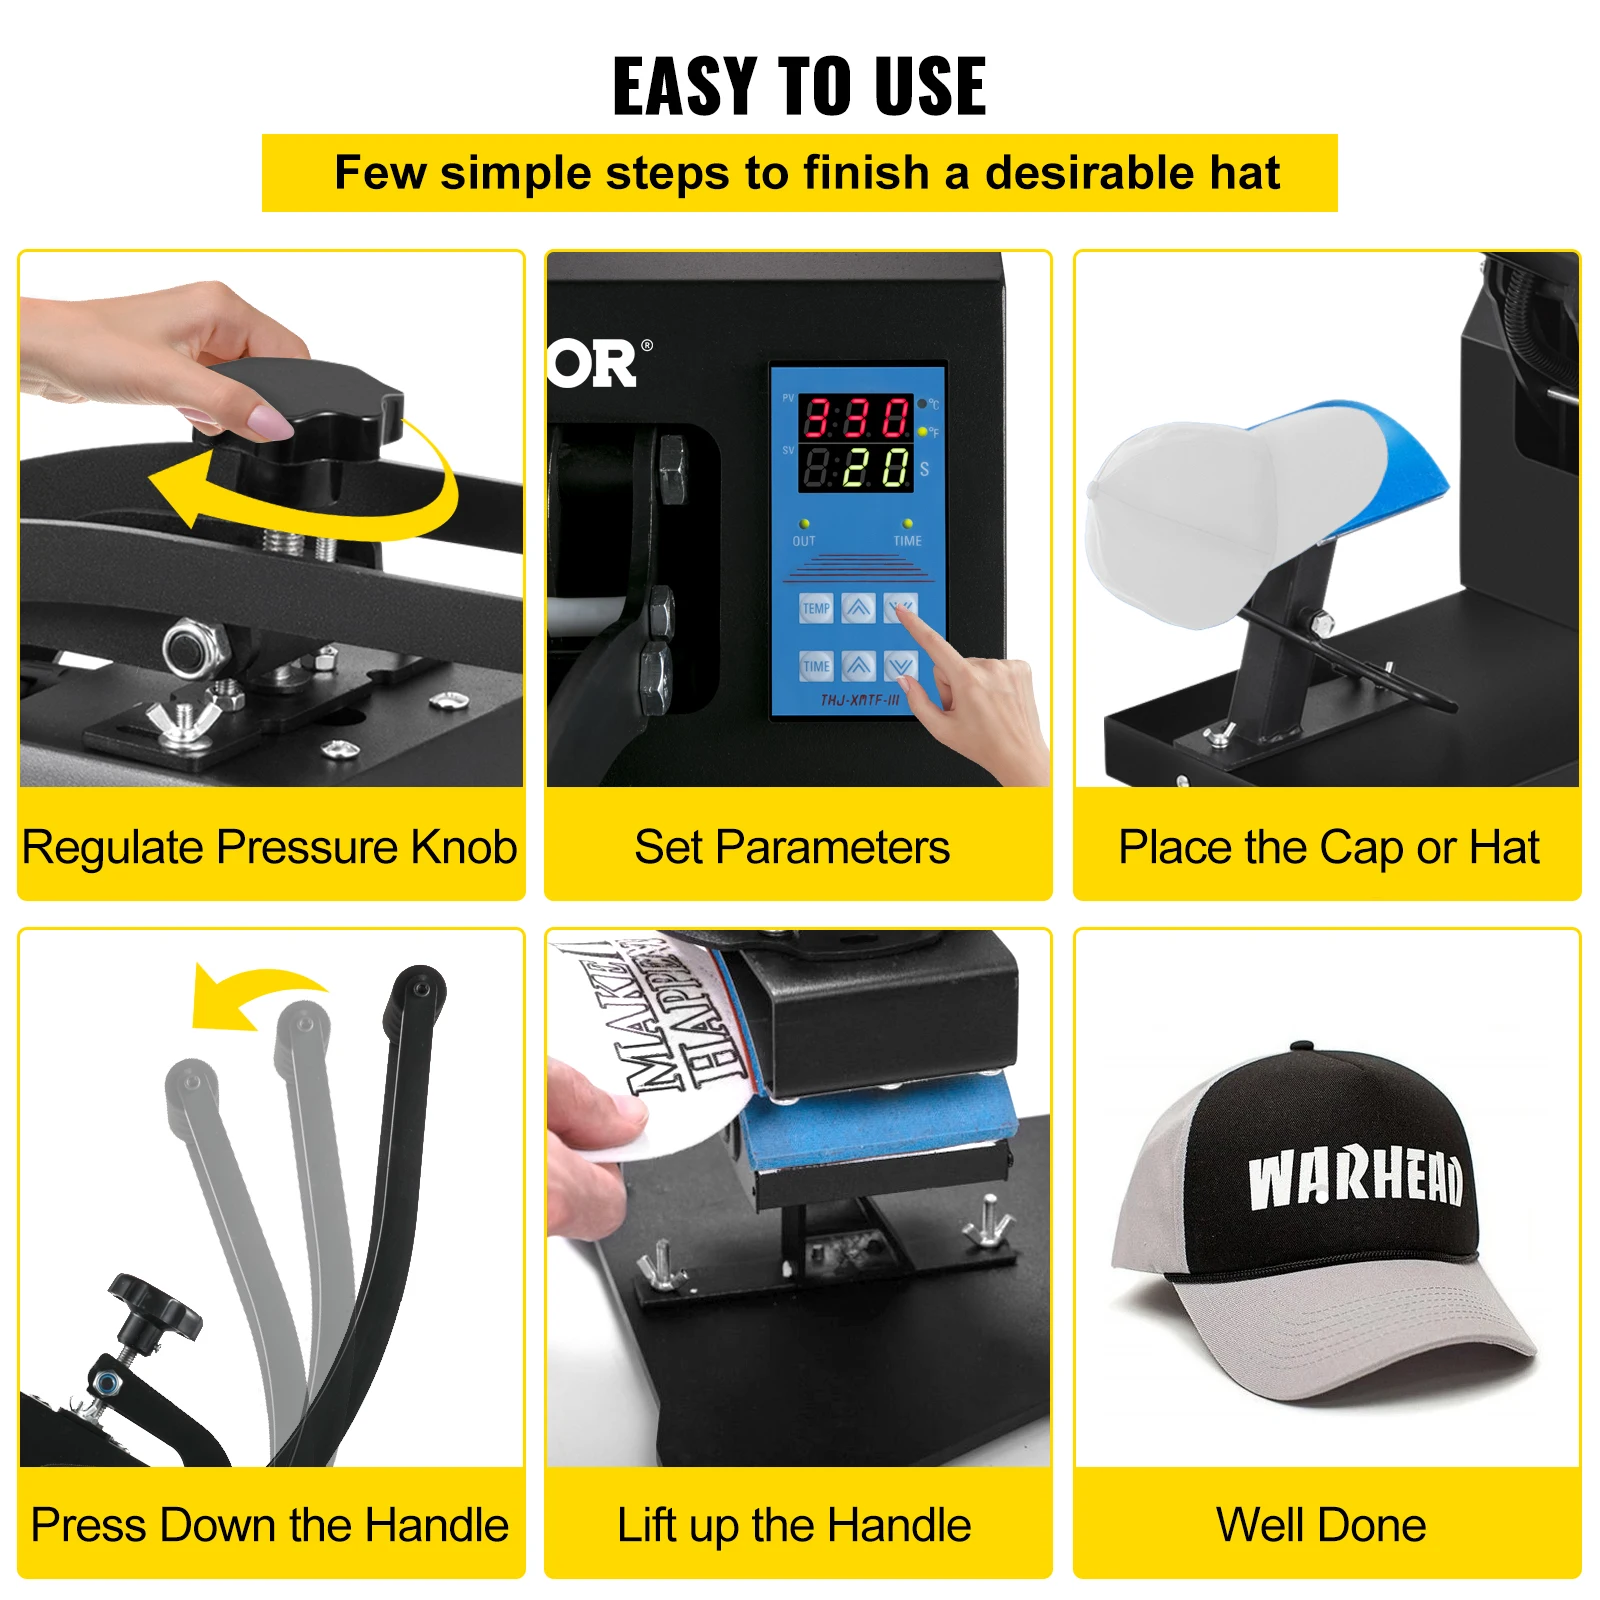 Sihao Hat Cap Heat Press 5.5 X 3.5 Inch Heat Transfer Stamping Sublimation  Machine Digital Display Clamshell For Diy Advertising - Heat Press Machine  - AliExpress